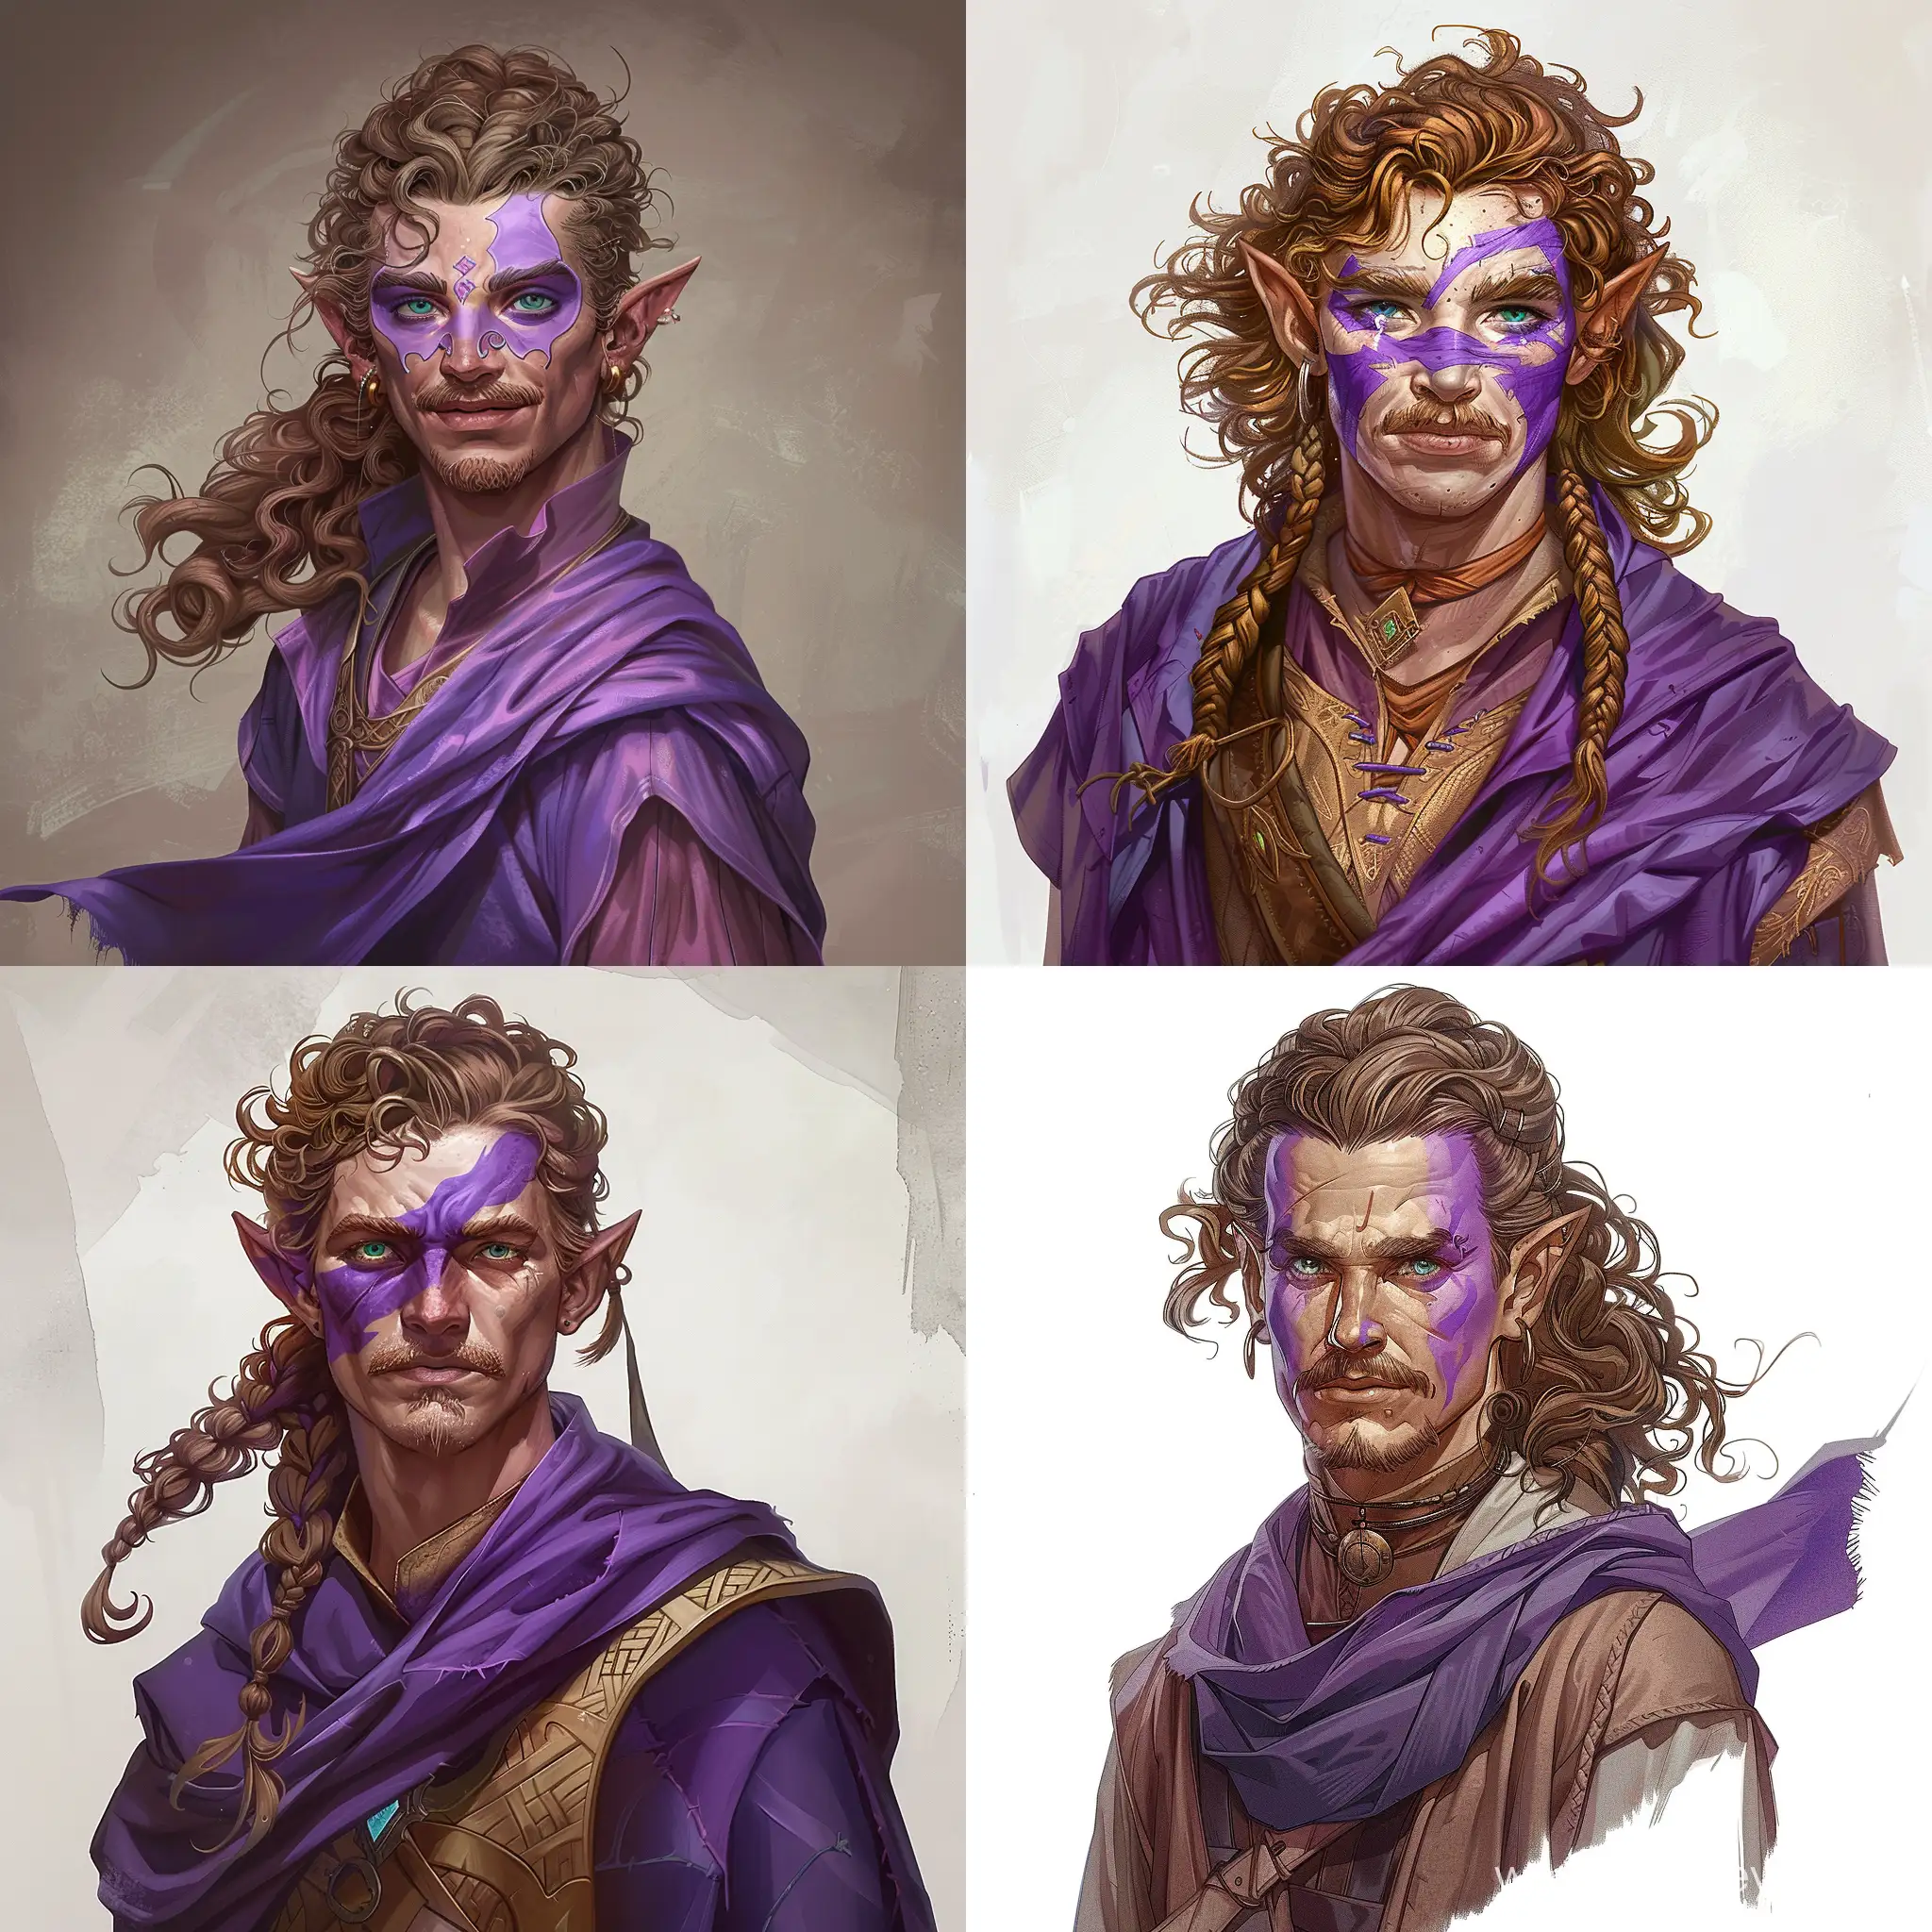 dnd character a human race male sorcere standing in full height art, round lobe earshape, mid fit physique, straight button nose with a bit of wide nasal bridge and upturned wide point, blue-green colour mixed oval eyes, angled eyebrows, short mouth, round ear lobe, mid set cheekbones, oval headshape, long loose curly light-brown braided hair flowing on the wind and covering ears, bristly mustache, sarcastic smirk face expression, purple accurately done facepaint covering both eyes and eyesockets, wearing south byzantinian like rich purple coloured clothes, pathfinder wrath of the righteous character portrait artstyle